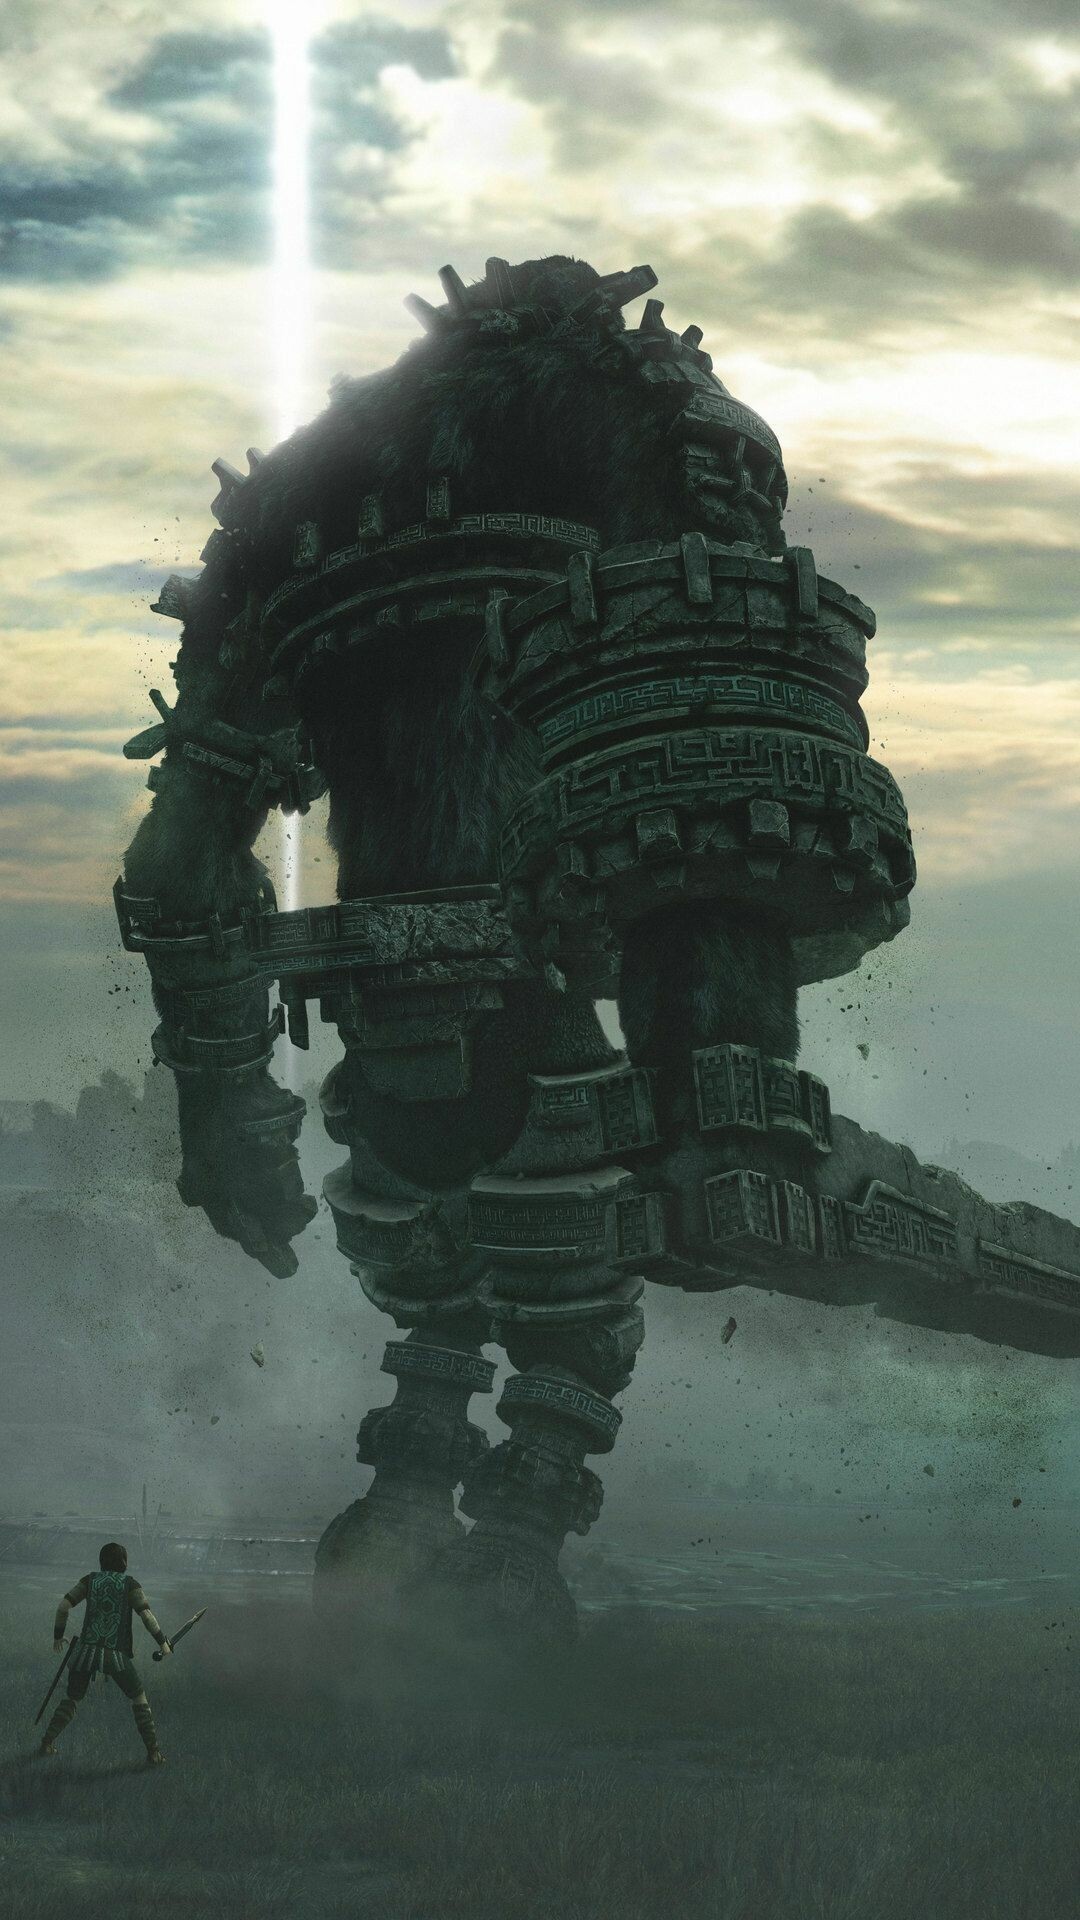 Shadow of the Colossus: A 2018 action-adventure video game developed by Bluepoint Games. 1080x1920 Full HD Background.